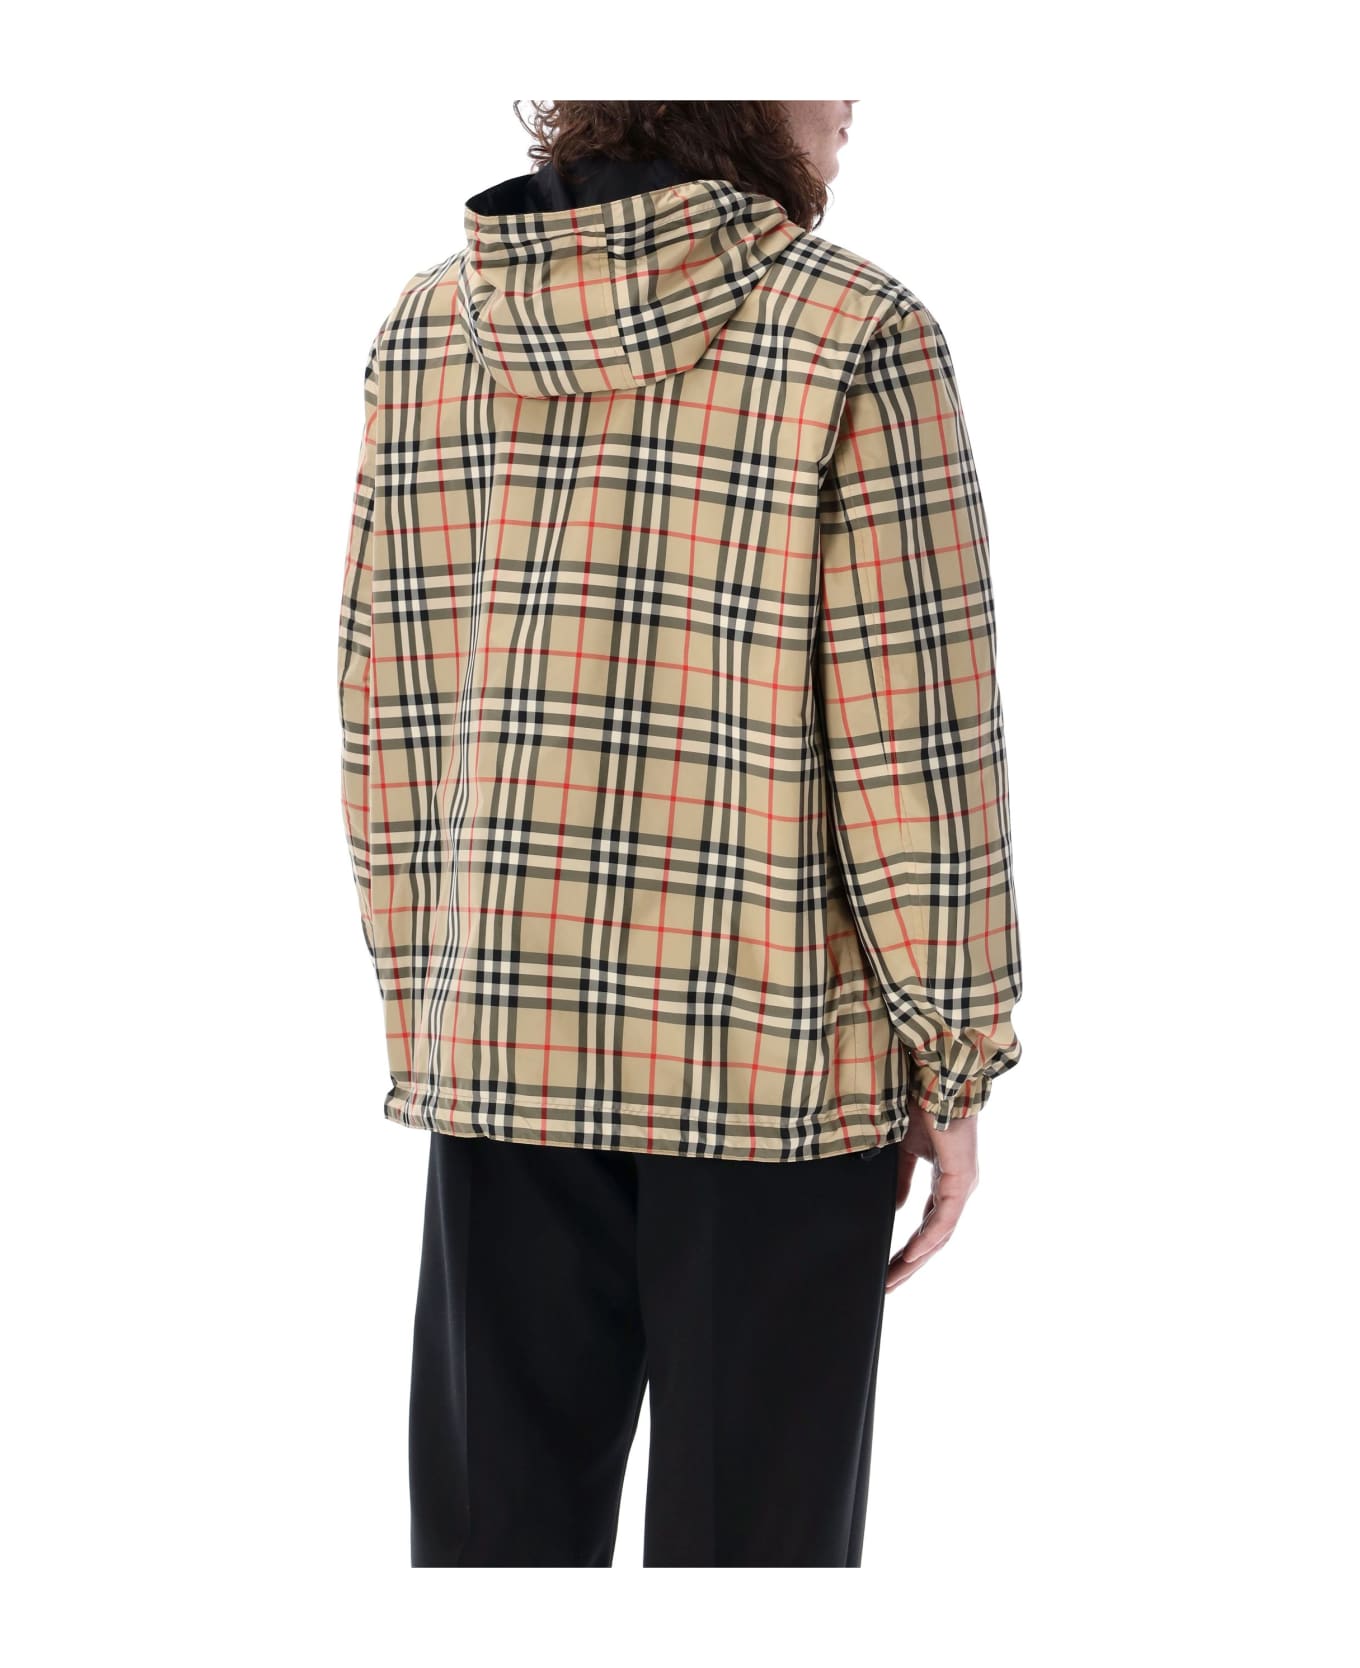 Burberry London Reversible Check Jacket - ARCHIVE BEIGE IP CHK ブレザー